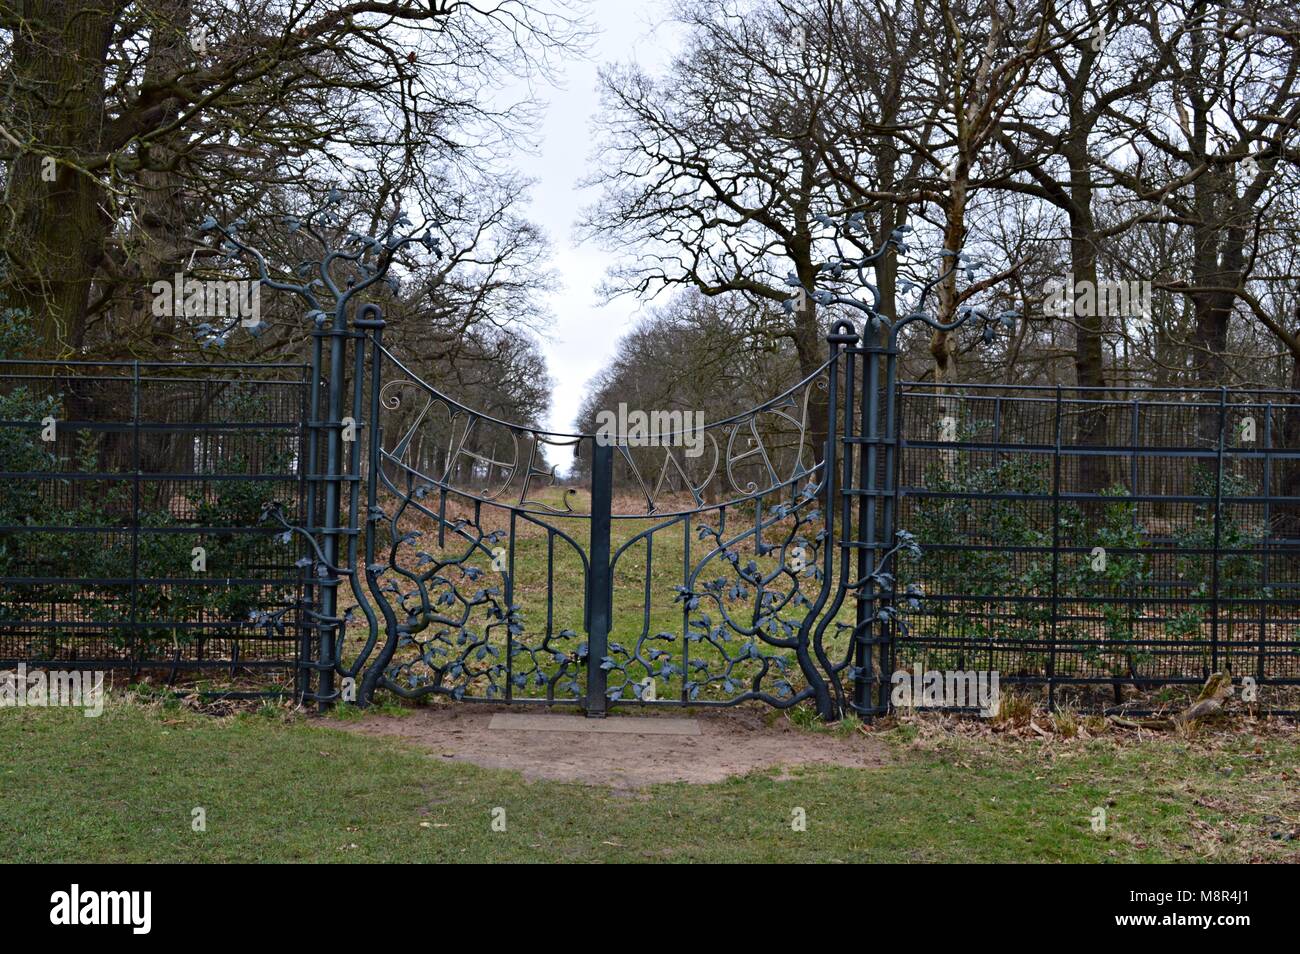 Ornate Iron Gates and Fencing in Richmond Park ,London Uk. Stock Photo